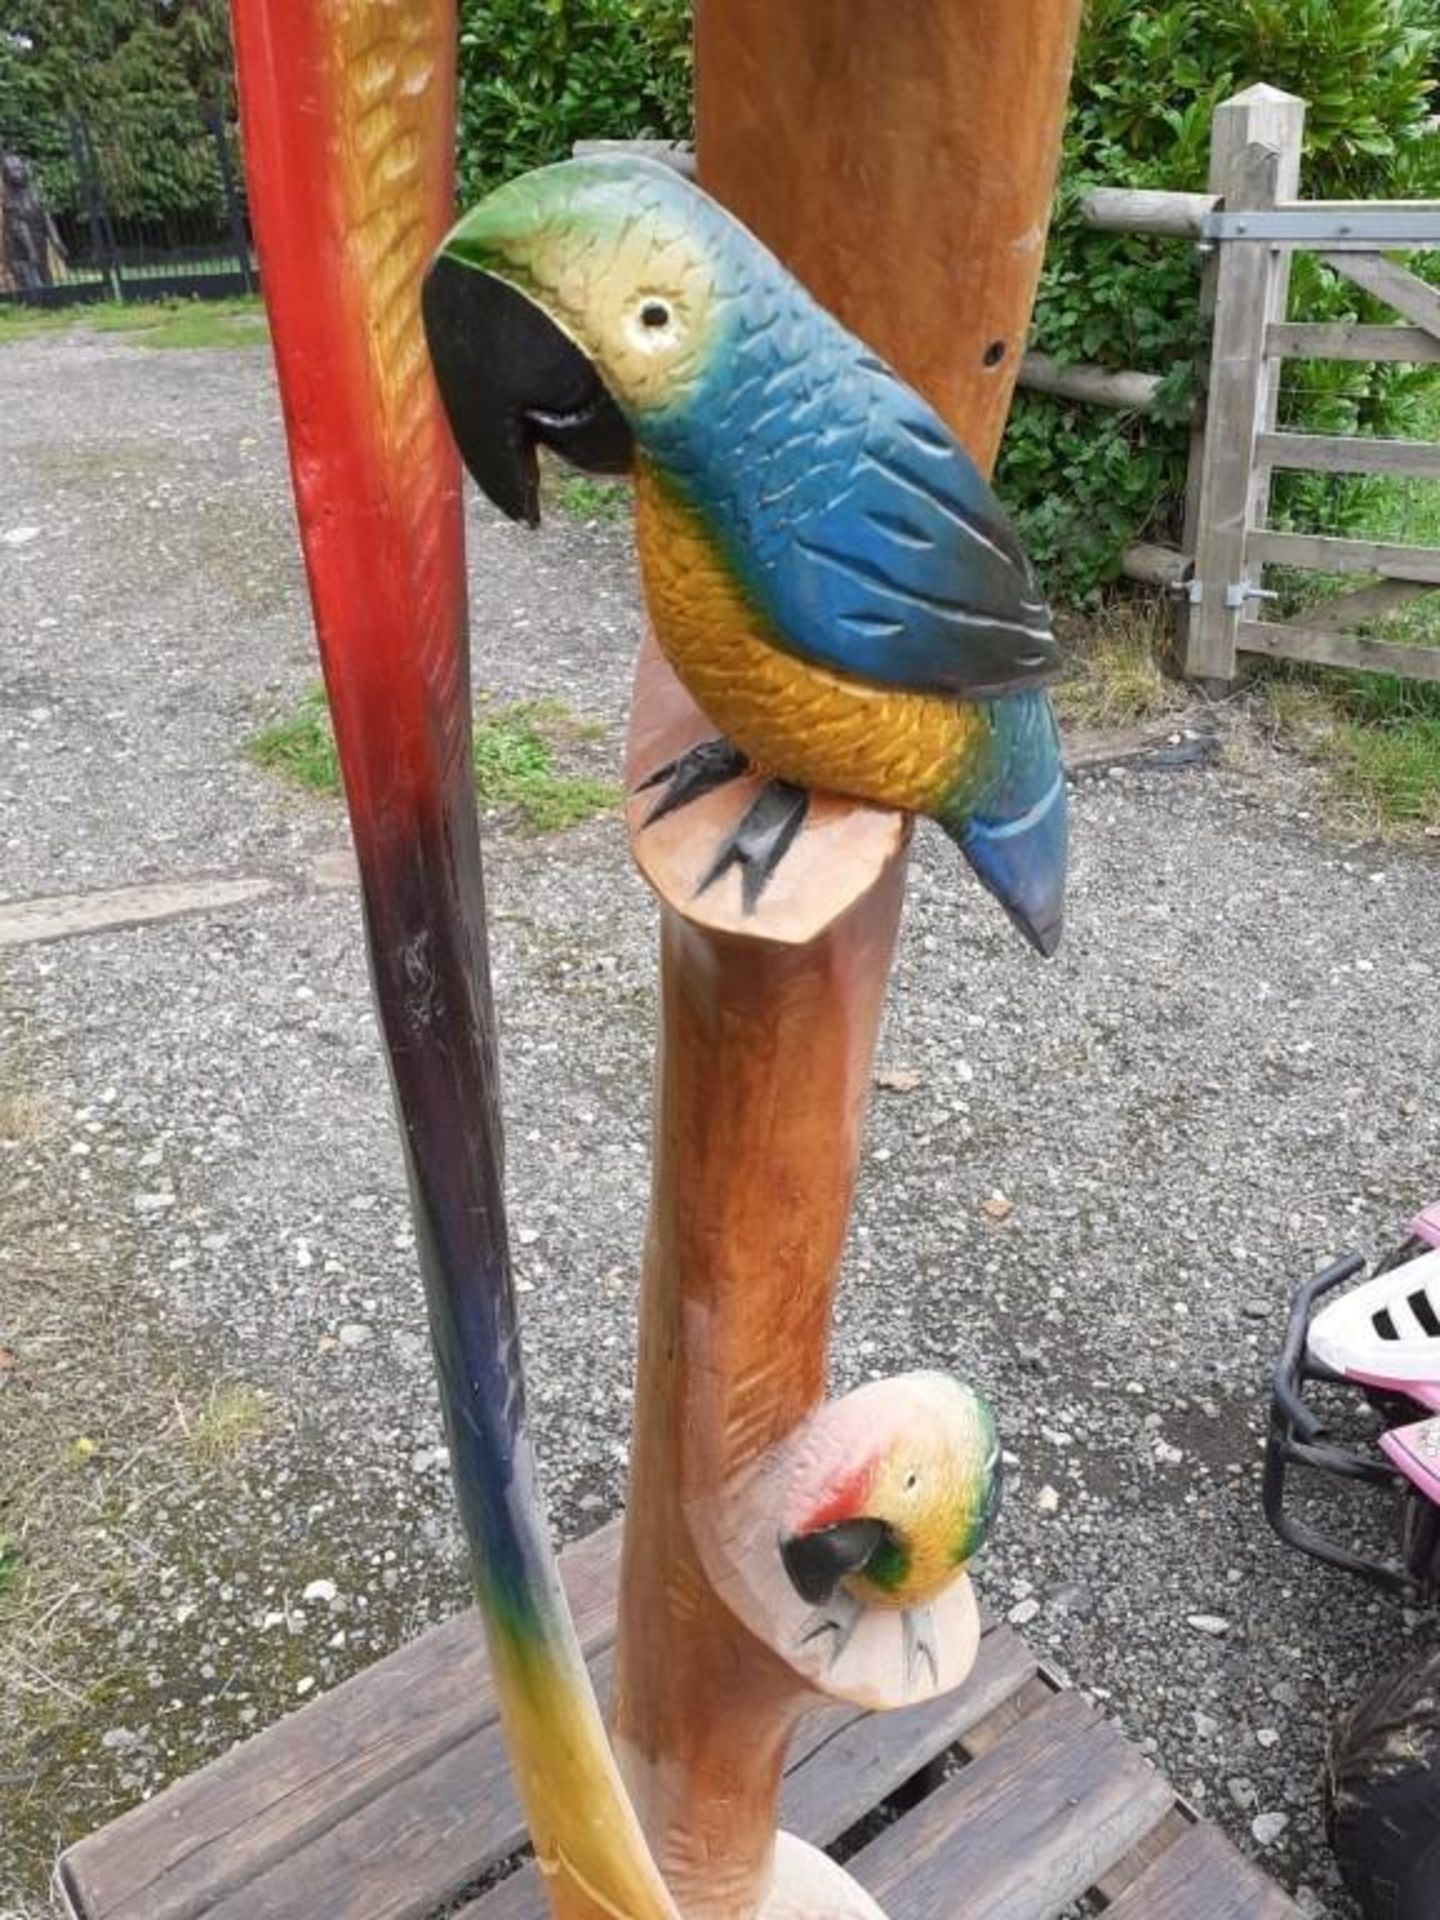 1 x 1.7-Metre Tall Wooden Sculpture Featuring 3 Colourful Parrots - Dimensions: Height 170cm x - Image 8 of 9